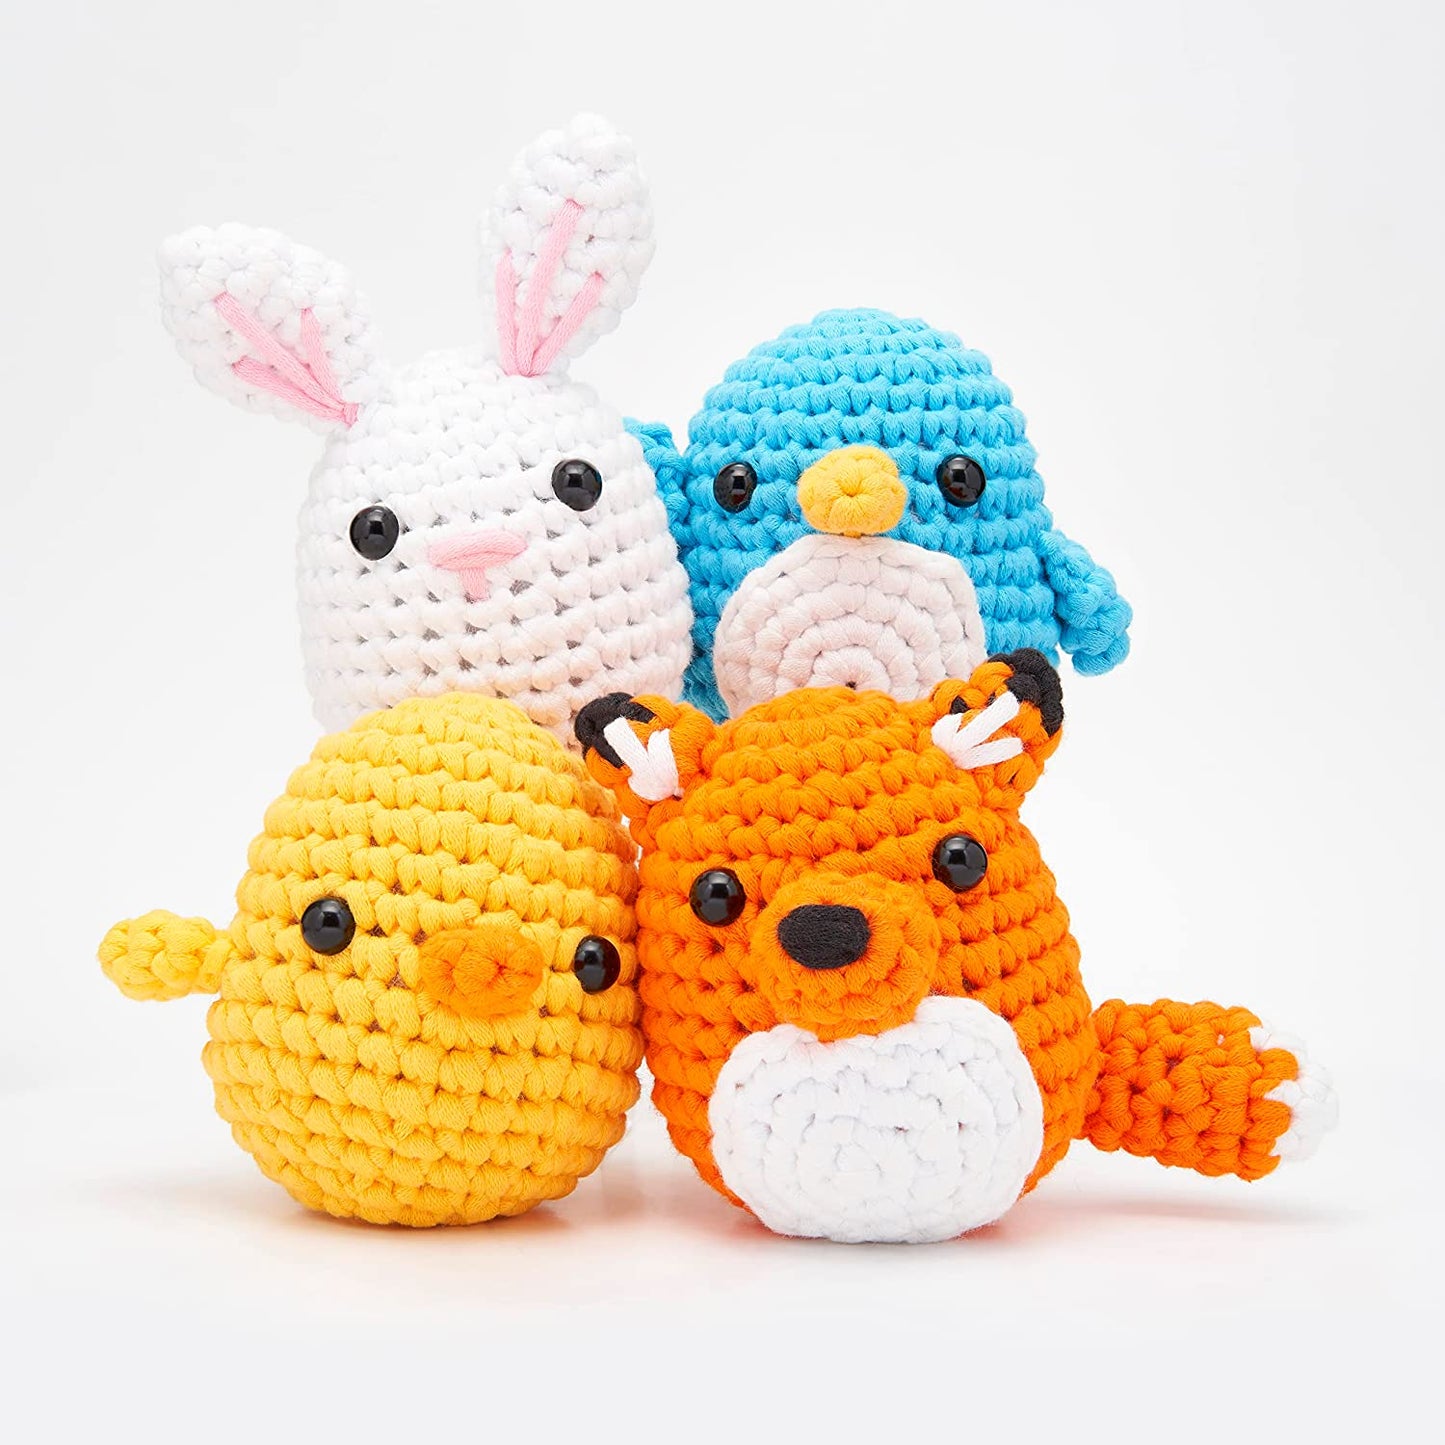 Beginners Crochet Kit with Easy Peasy Yarn as Seen on Shark Tank - with Step-By-Step Video Tutorials - Pierre the Penguin